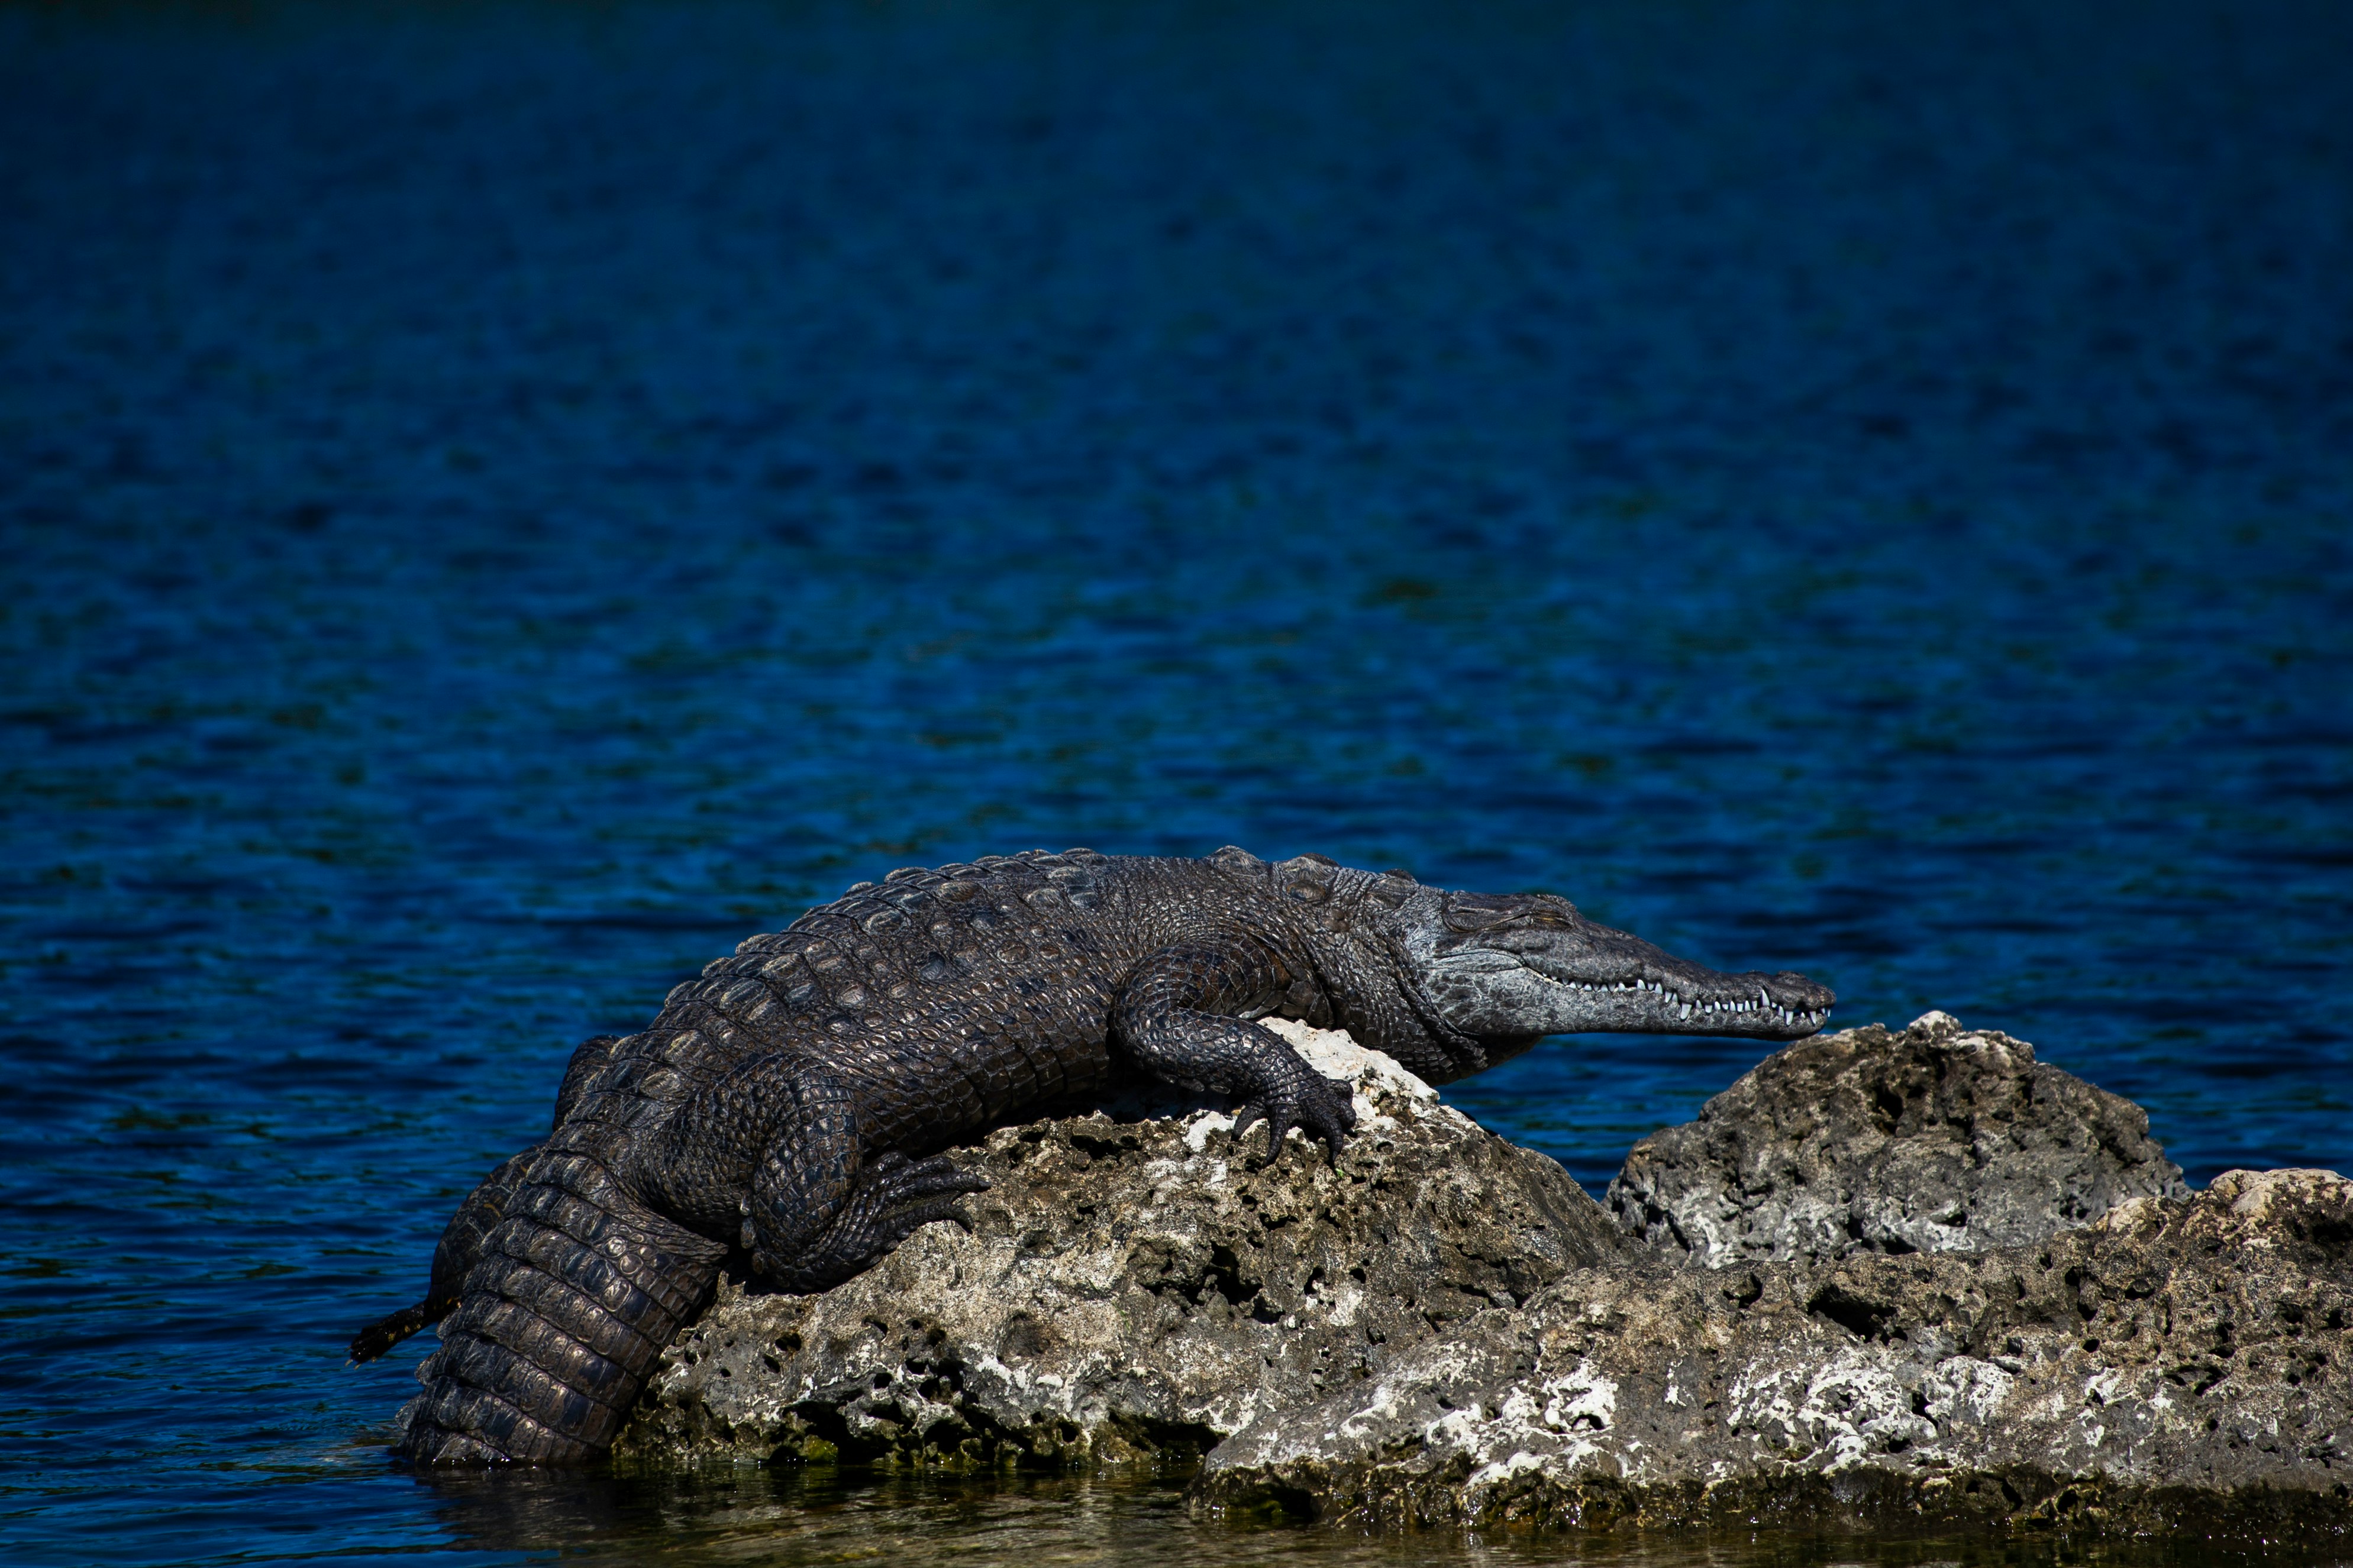 black crocodile on brown rock near body of water during daytime